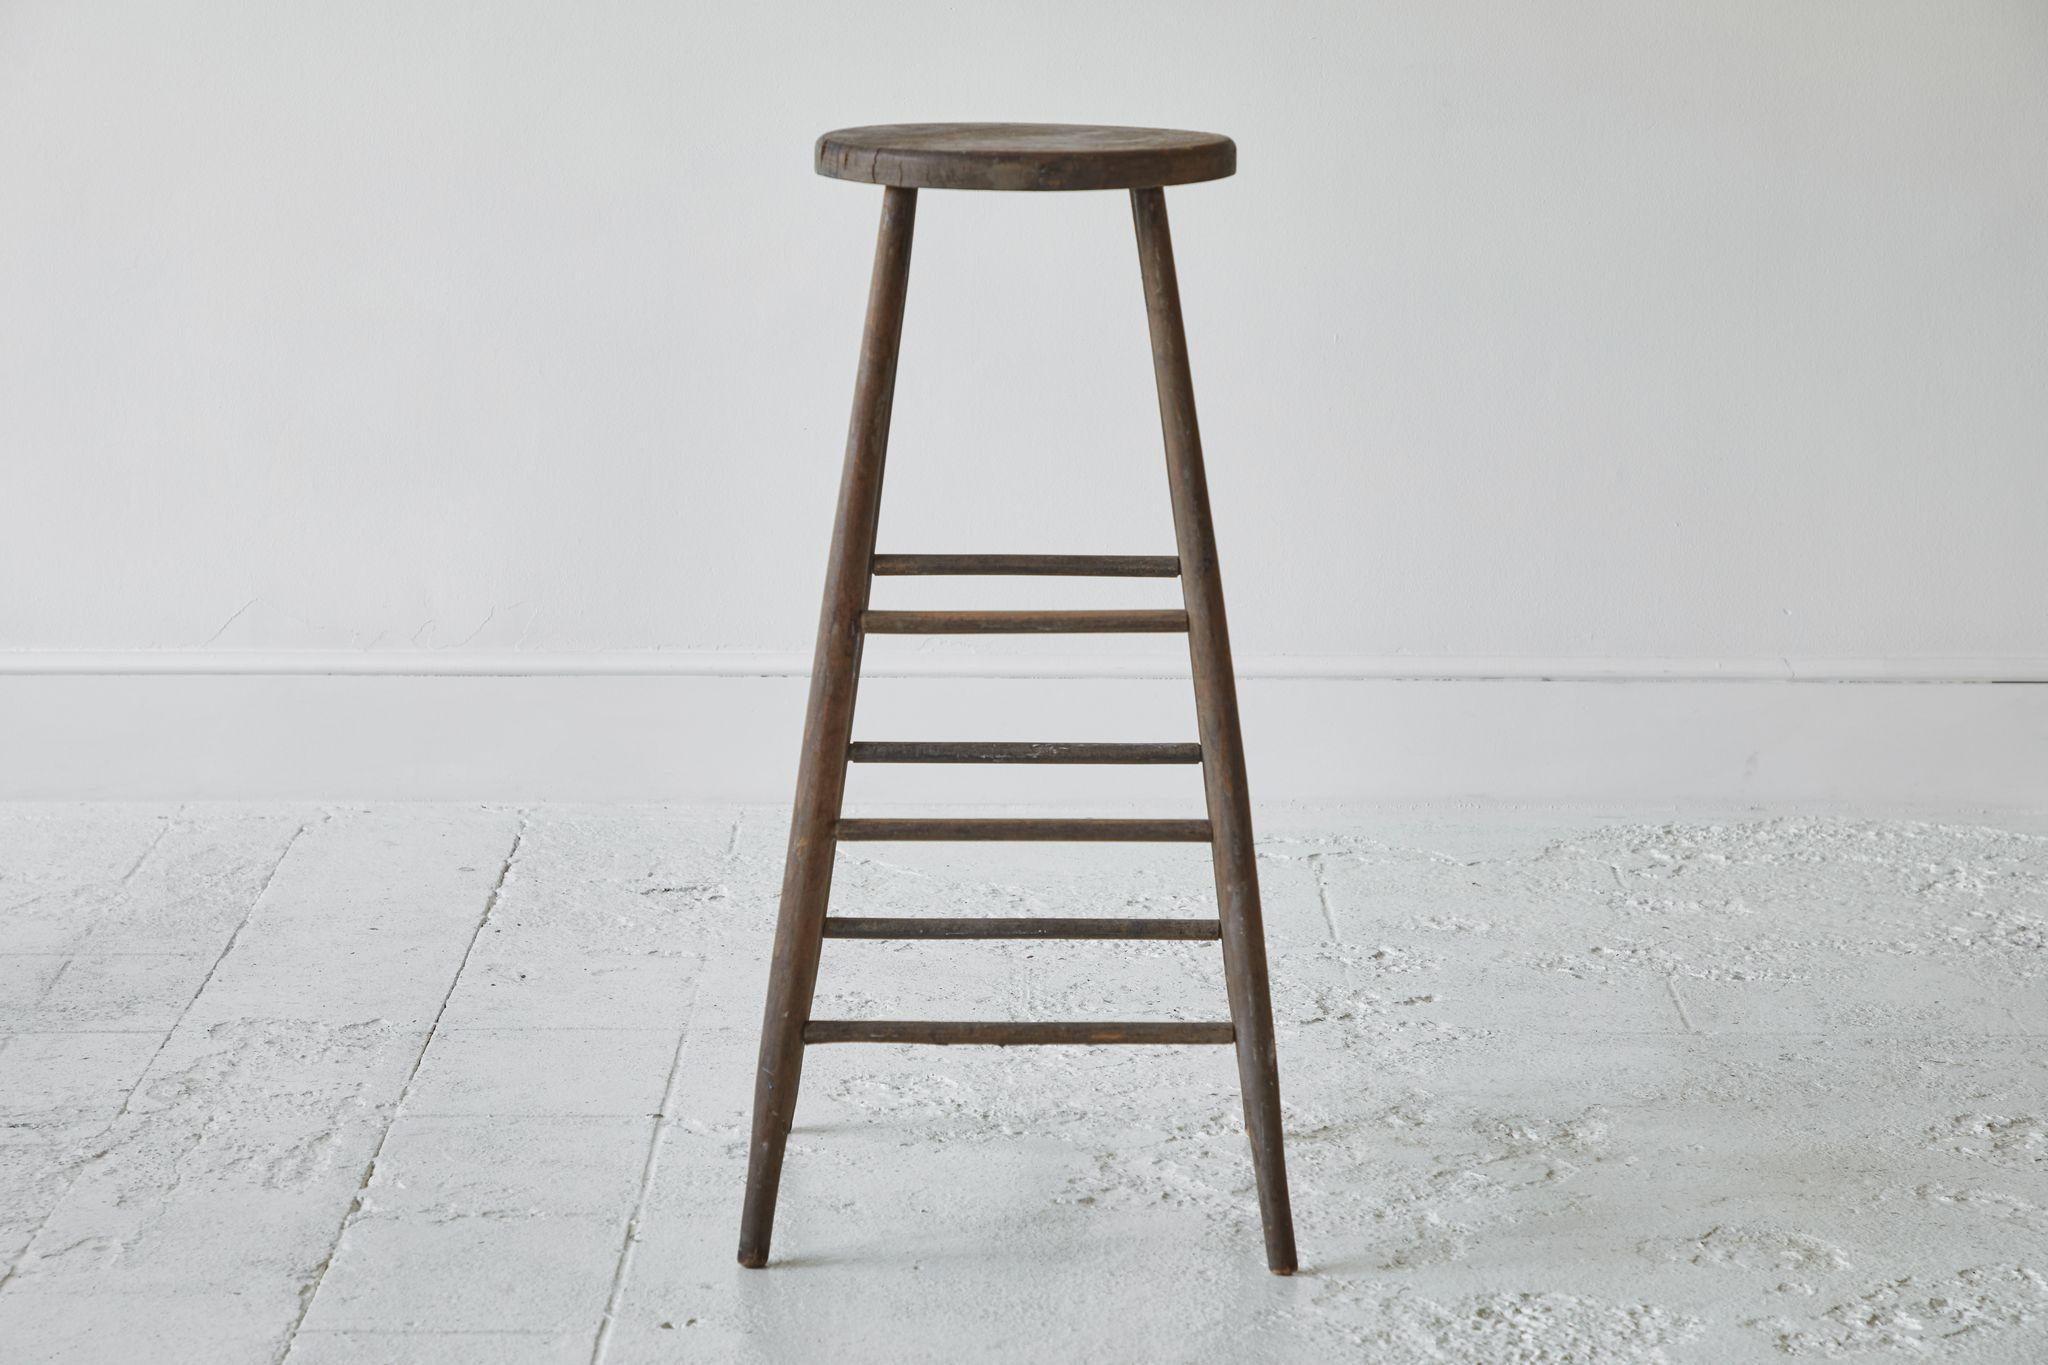 Early American rustic tall stool, with four turned legs. Seat measures: 13